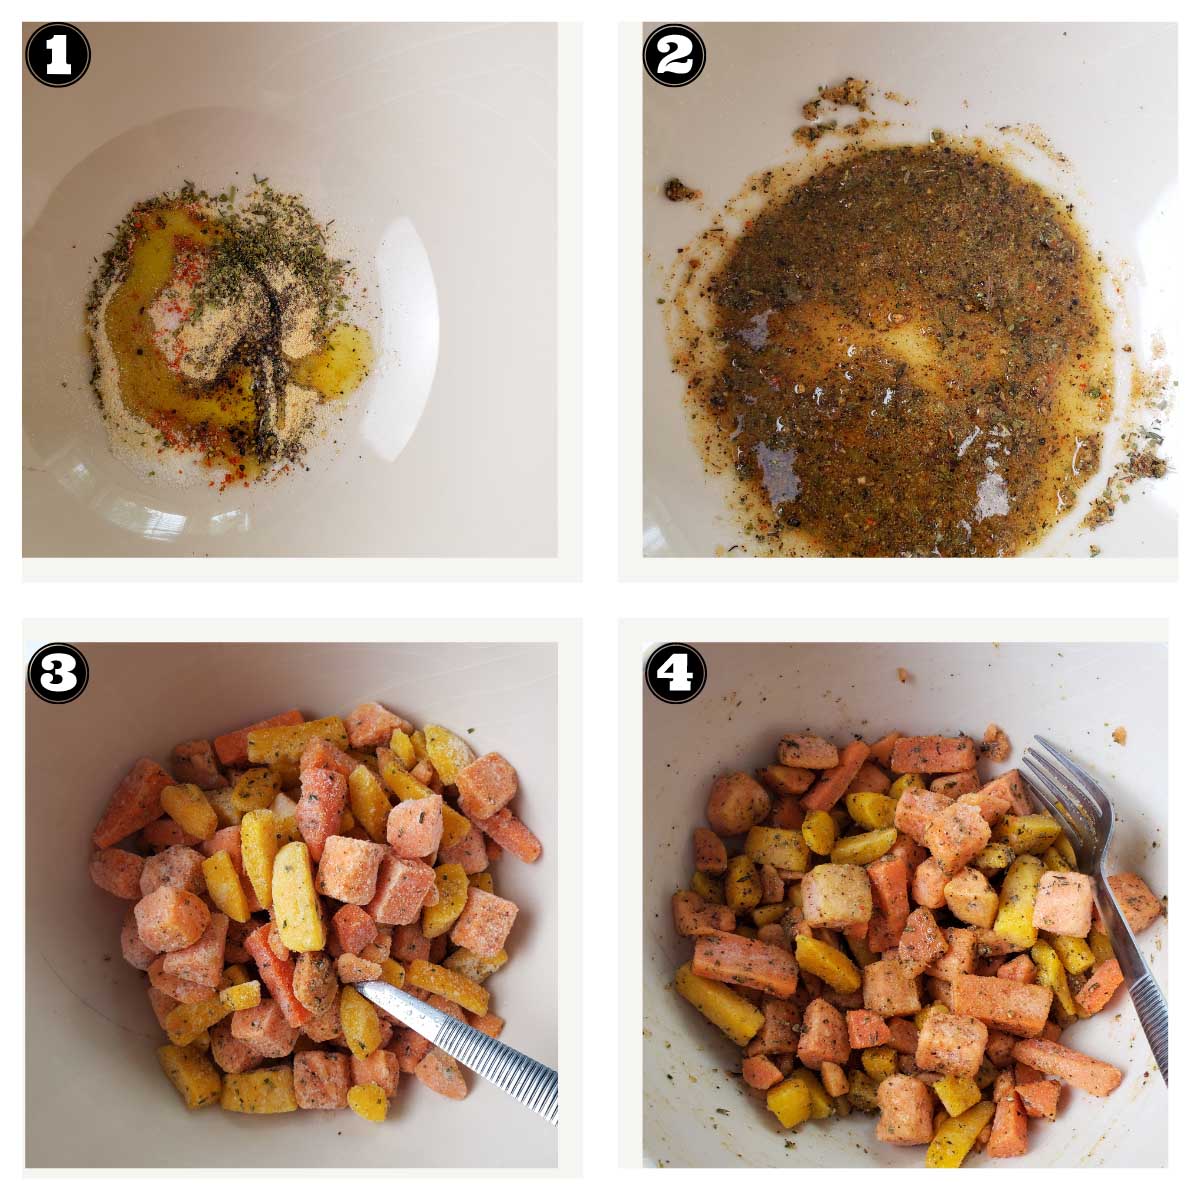 images showing stages involved in coating the sweet potato chunks in spices